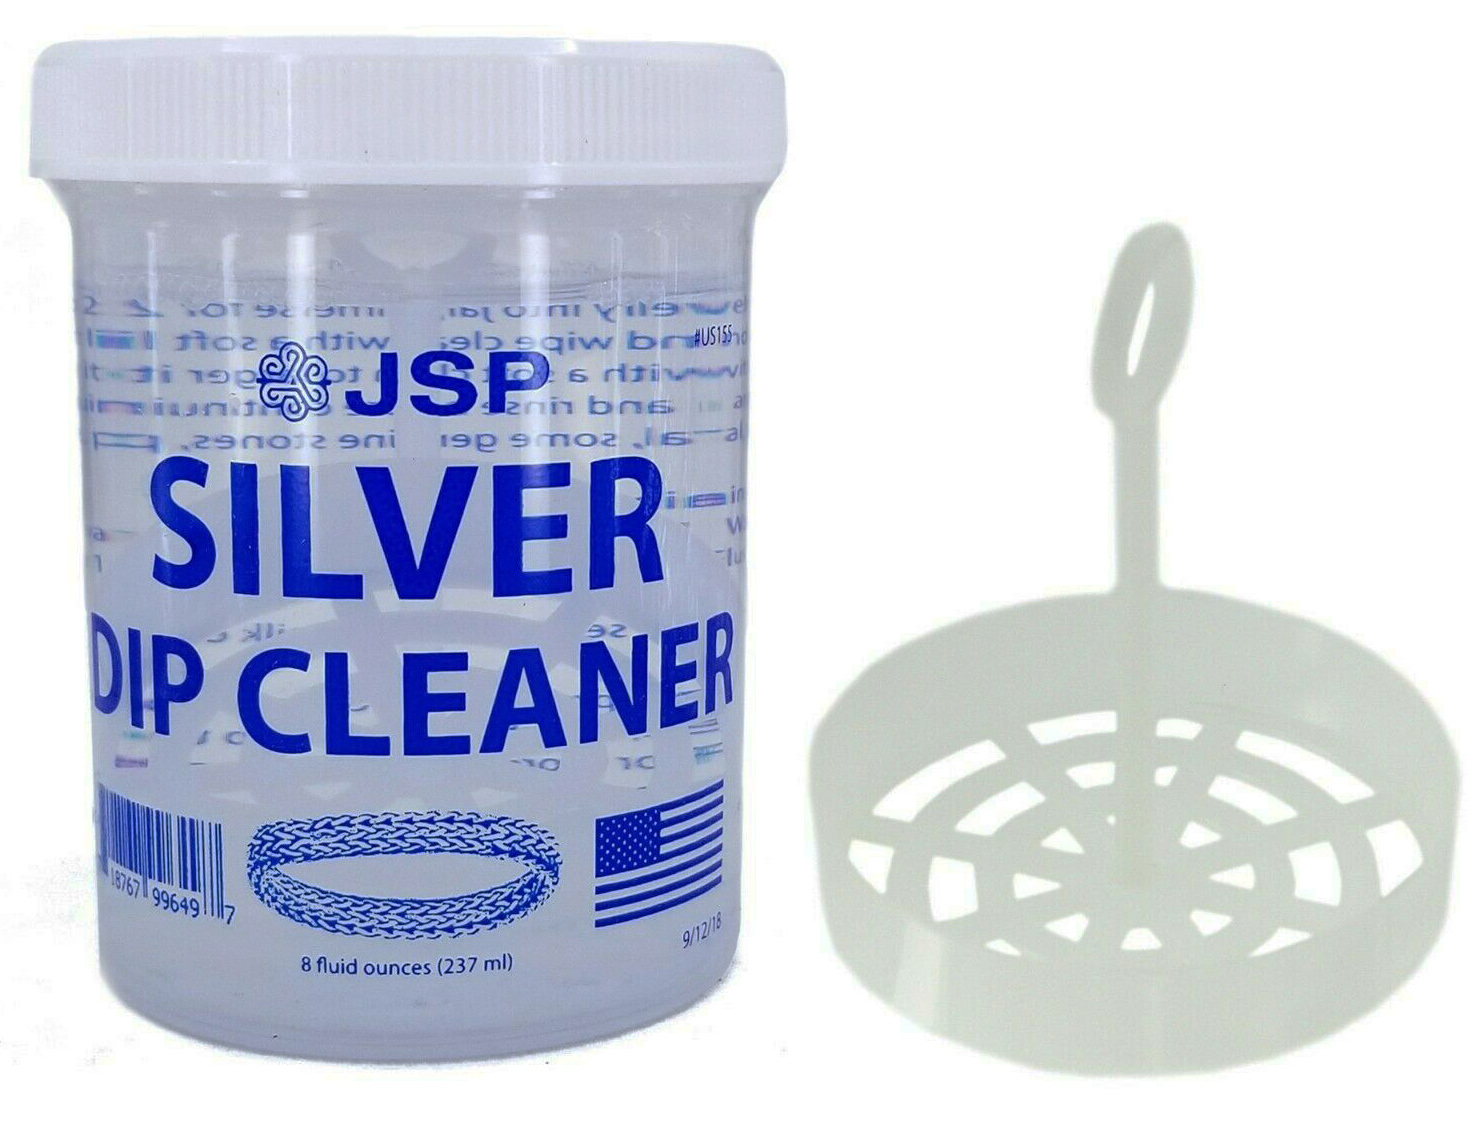 SILVER DIP CLEANER 8 ounces with basket